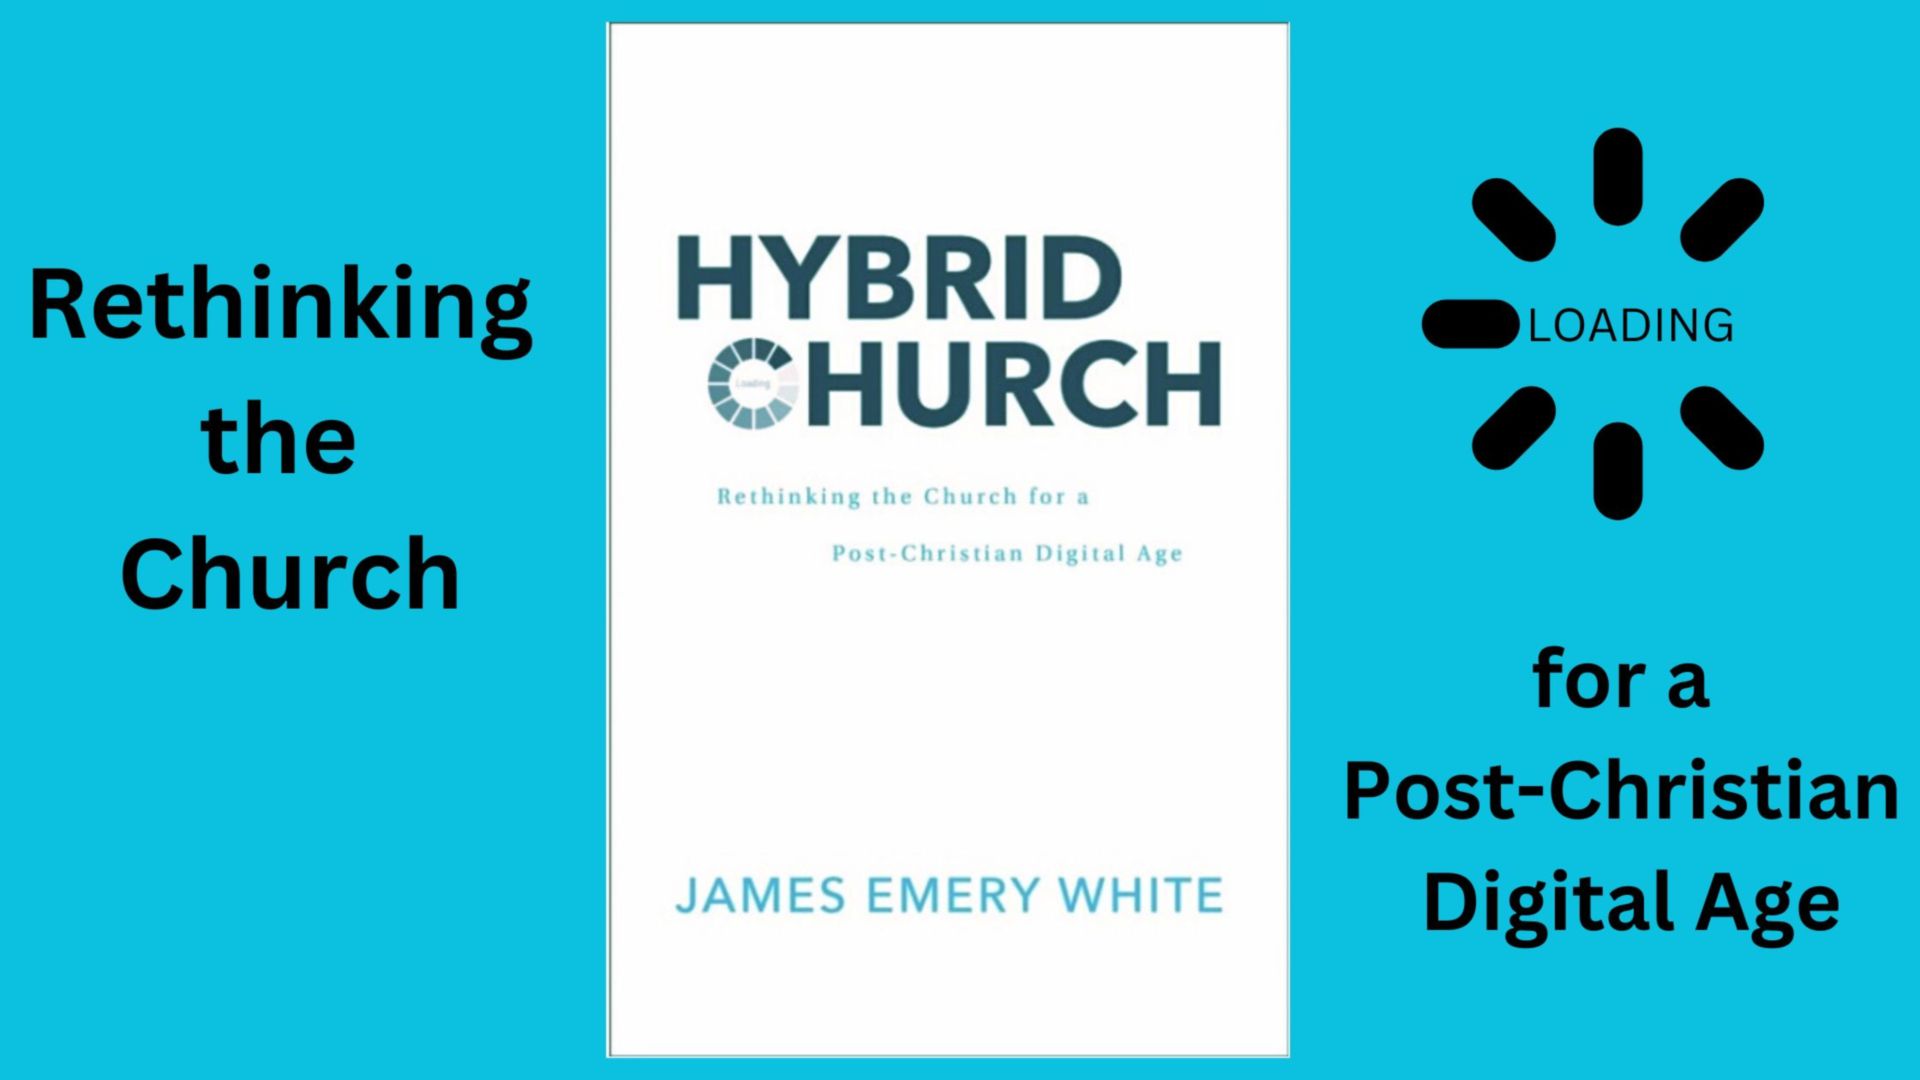 Review on James Emery White's new book 'Hybrid Church' 